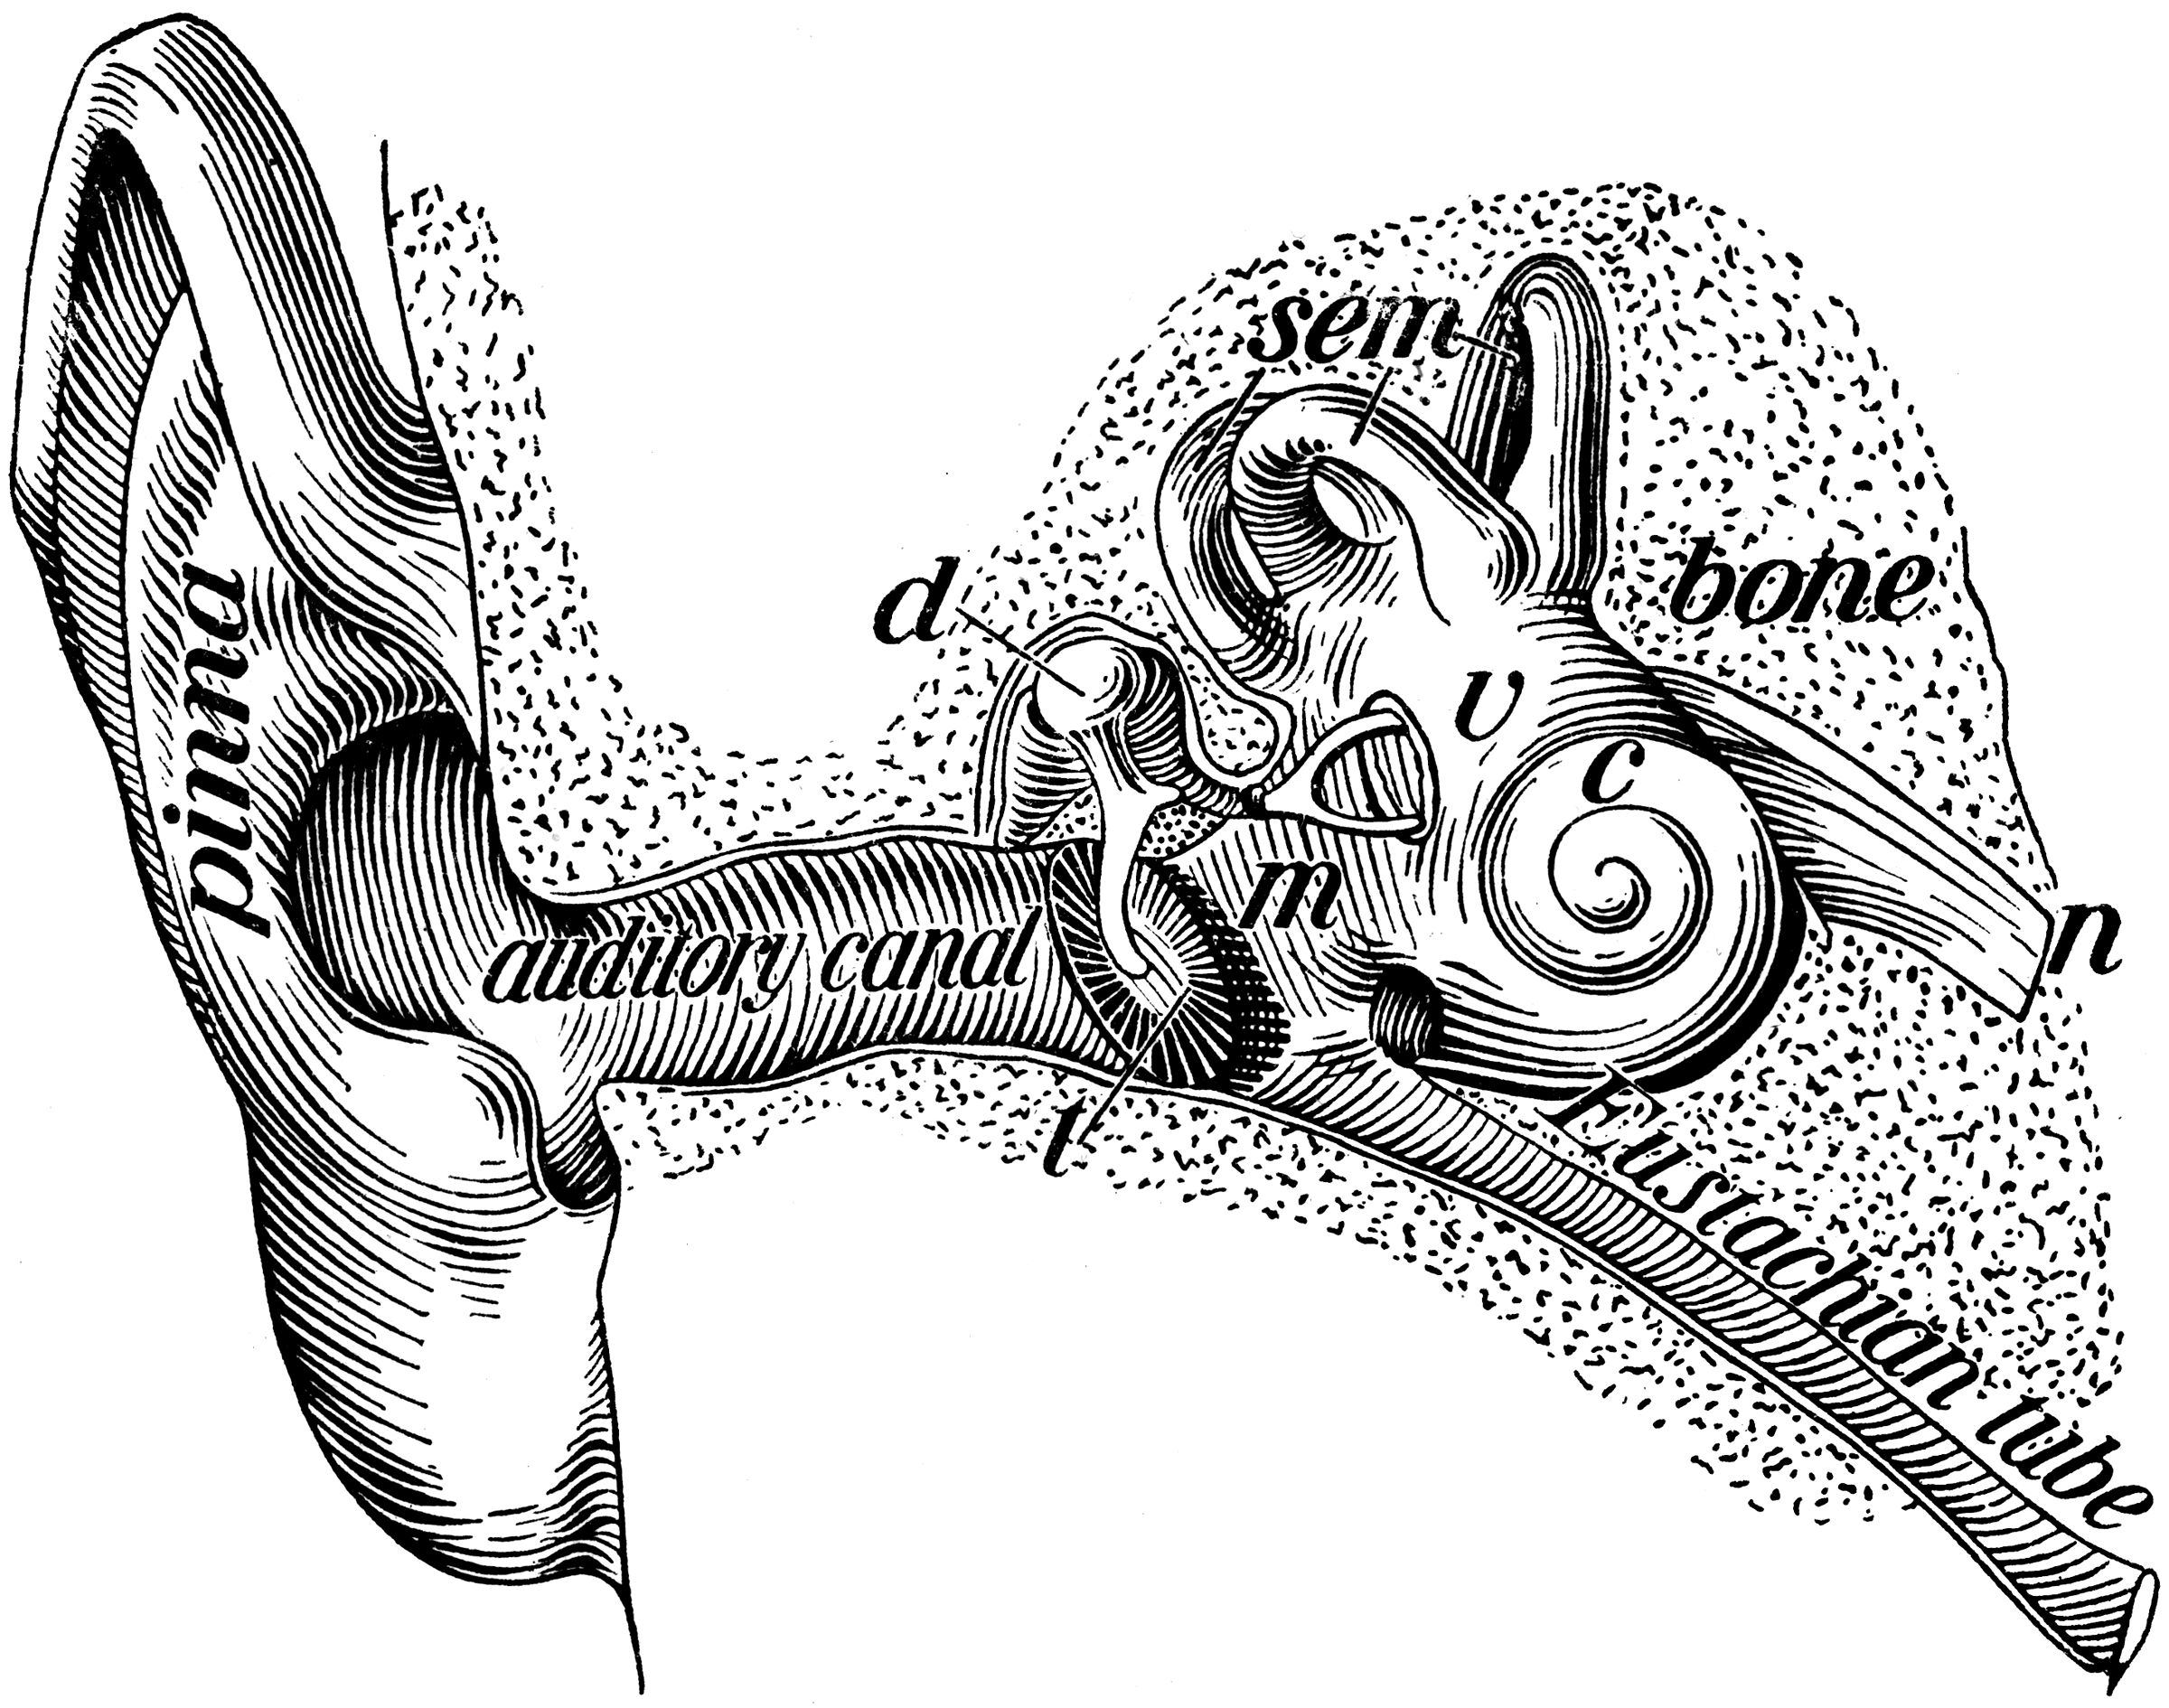 Structure of the Ear | ClipArt ETC